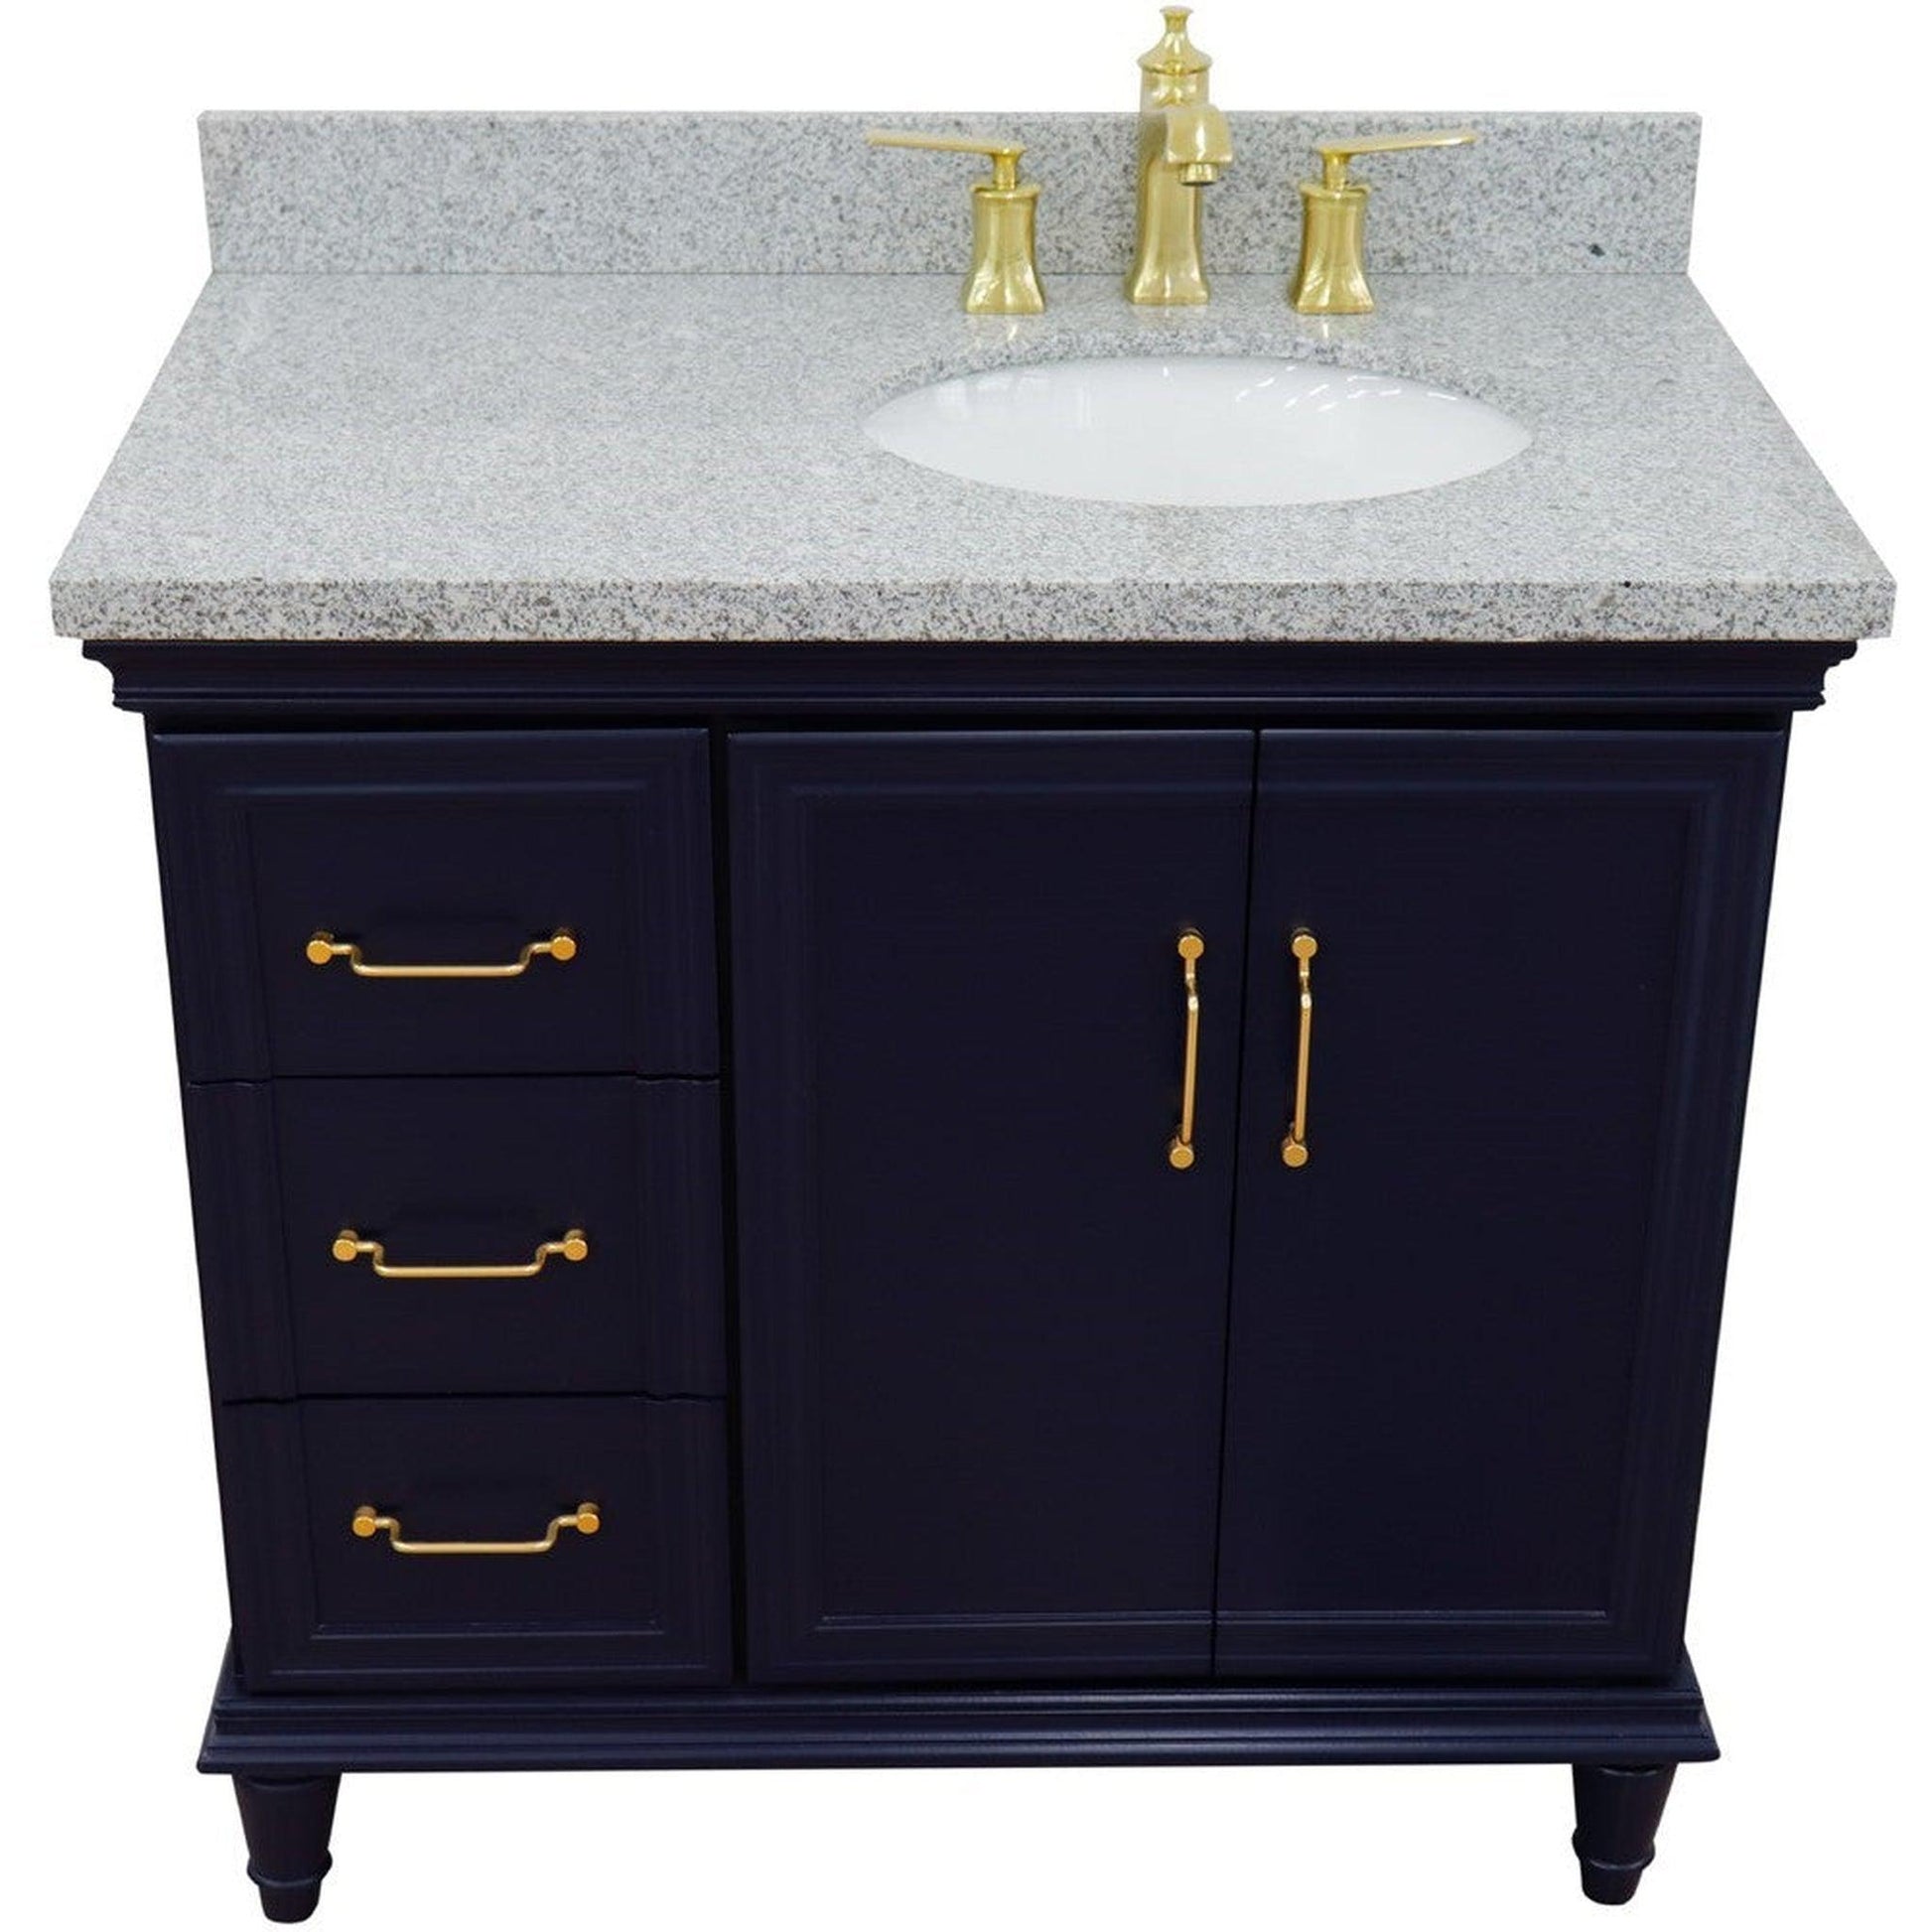 Bellaterra Home Forli 37" 2-Door 3-Drawer Blue Freestanding Vanity Set With Ceramic Right Offset Undermount Oval Sink and Gray Granite Top, and Right Door Cabinet